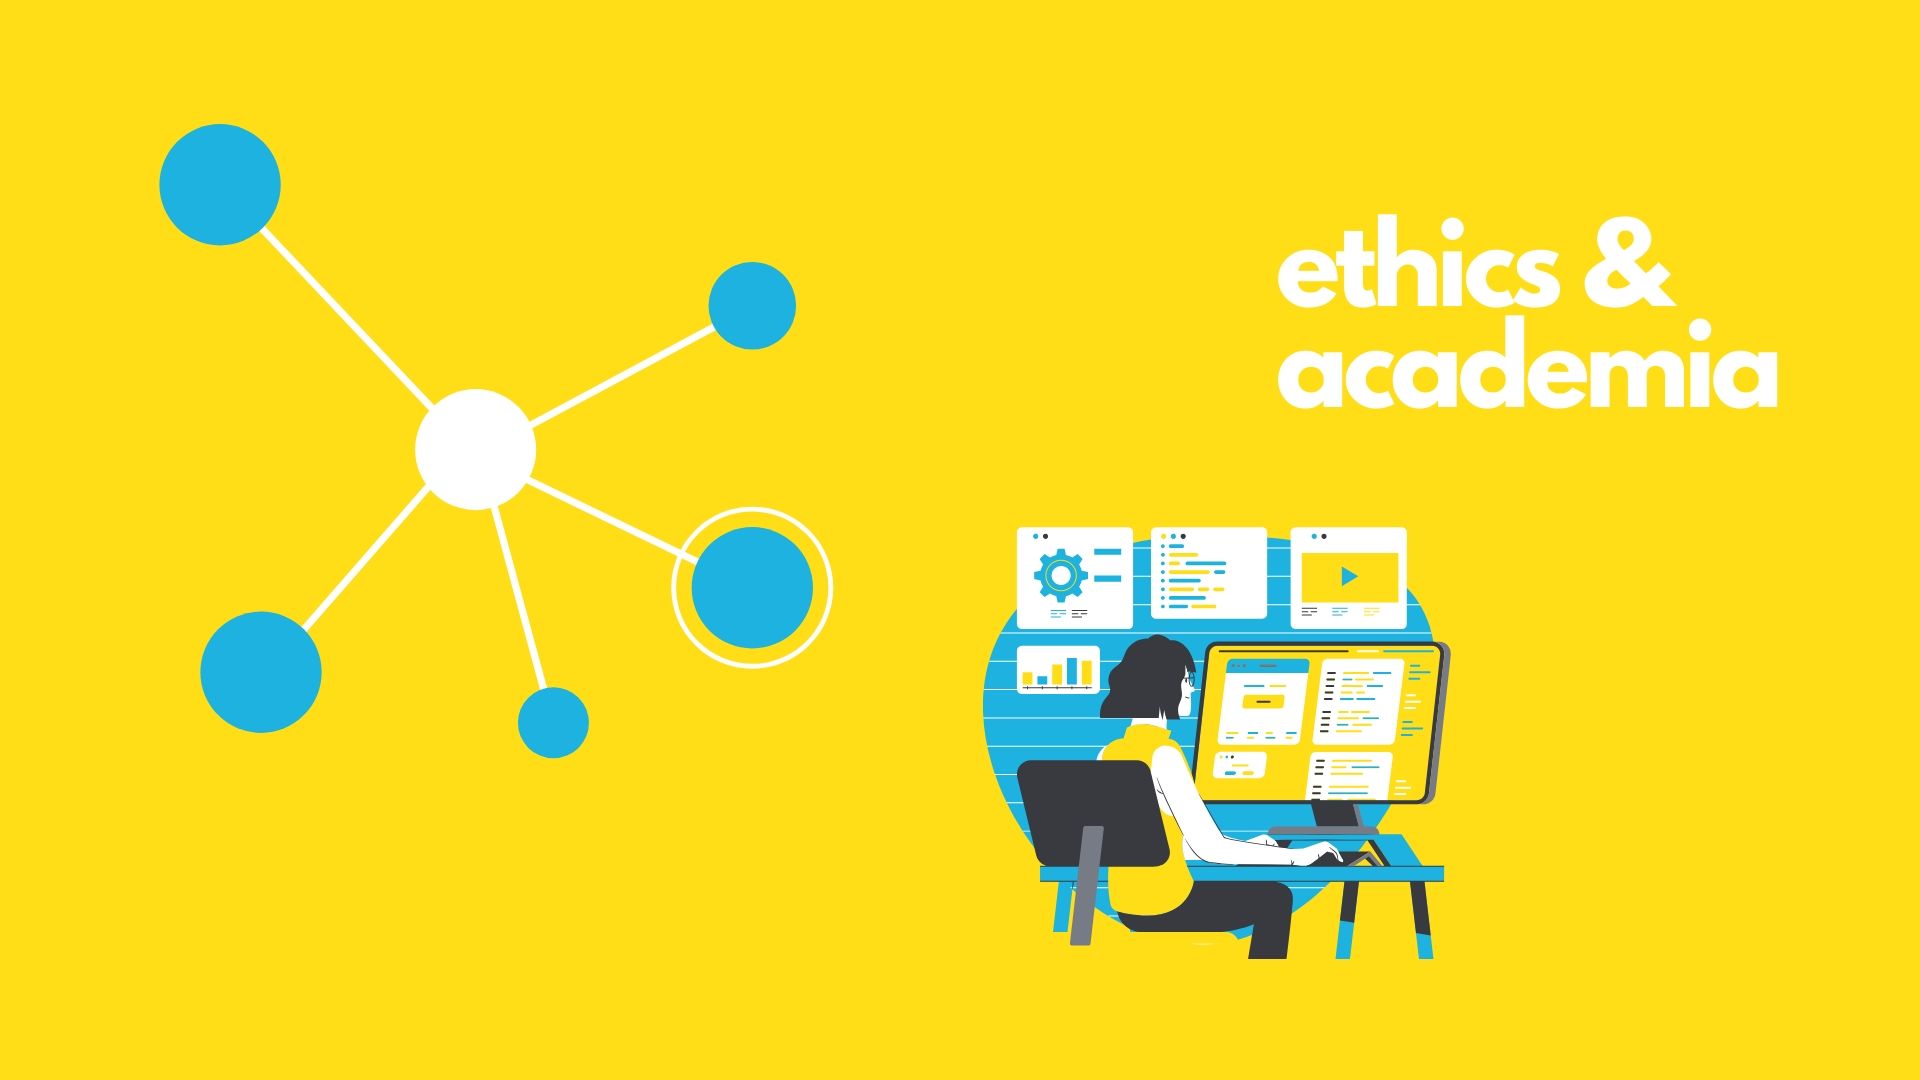 The text ethics & academia appears on a yellow background between a network node and an image of a woman drinking a hot beverage and reading a book